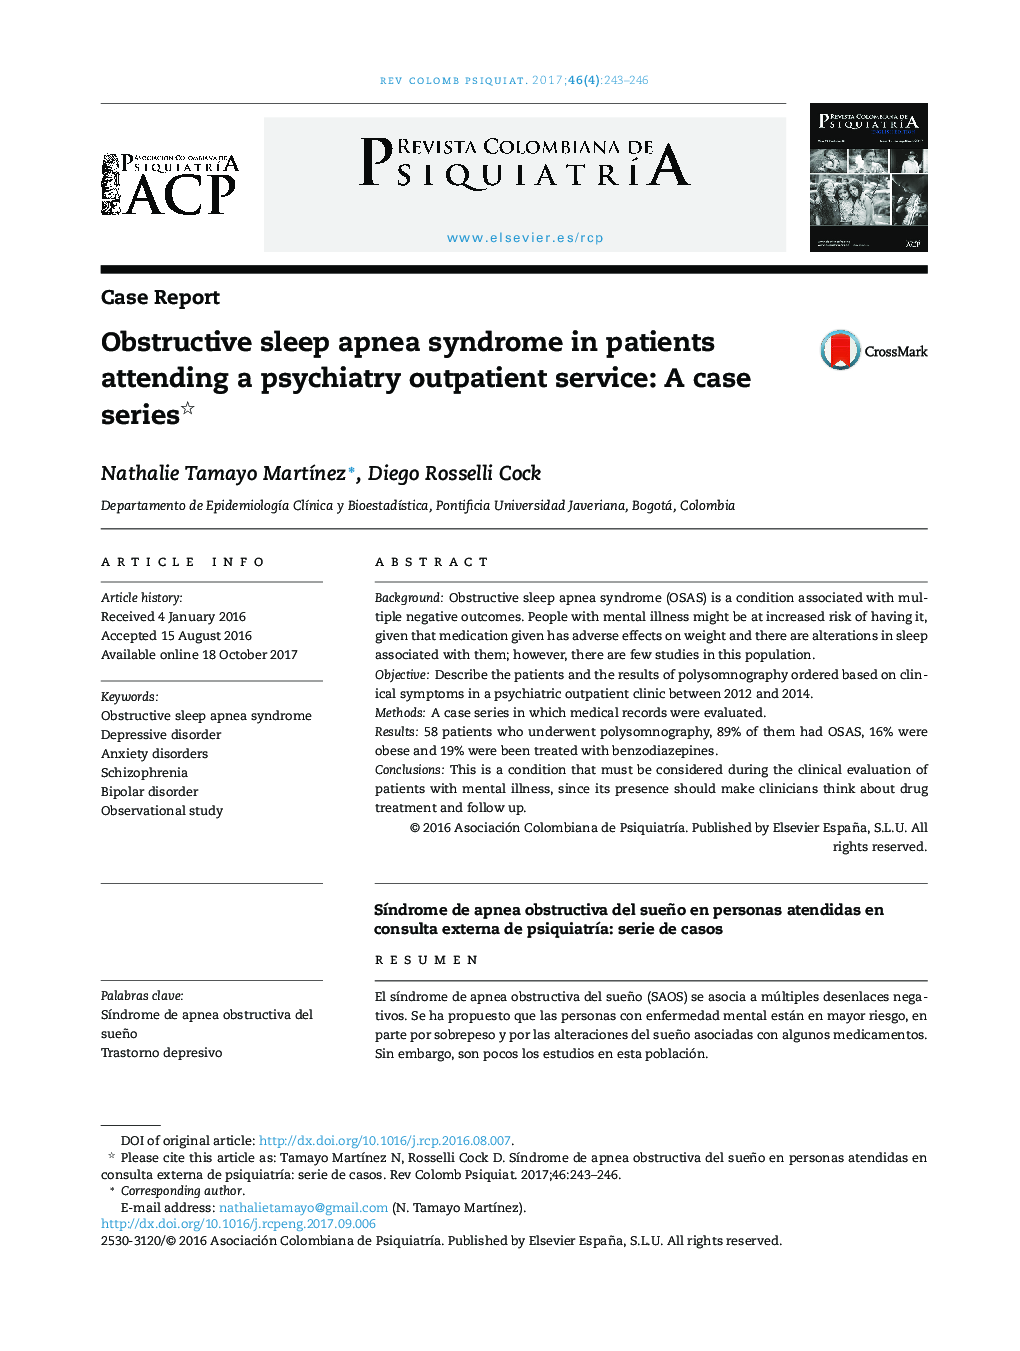 Obstructive sleep apnea syndrome in patients attending a psychiatry outpatient service: A case series